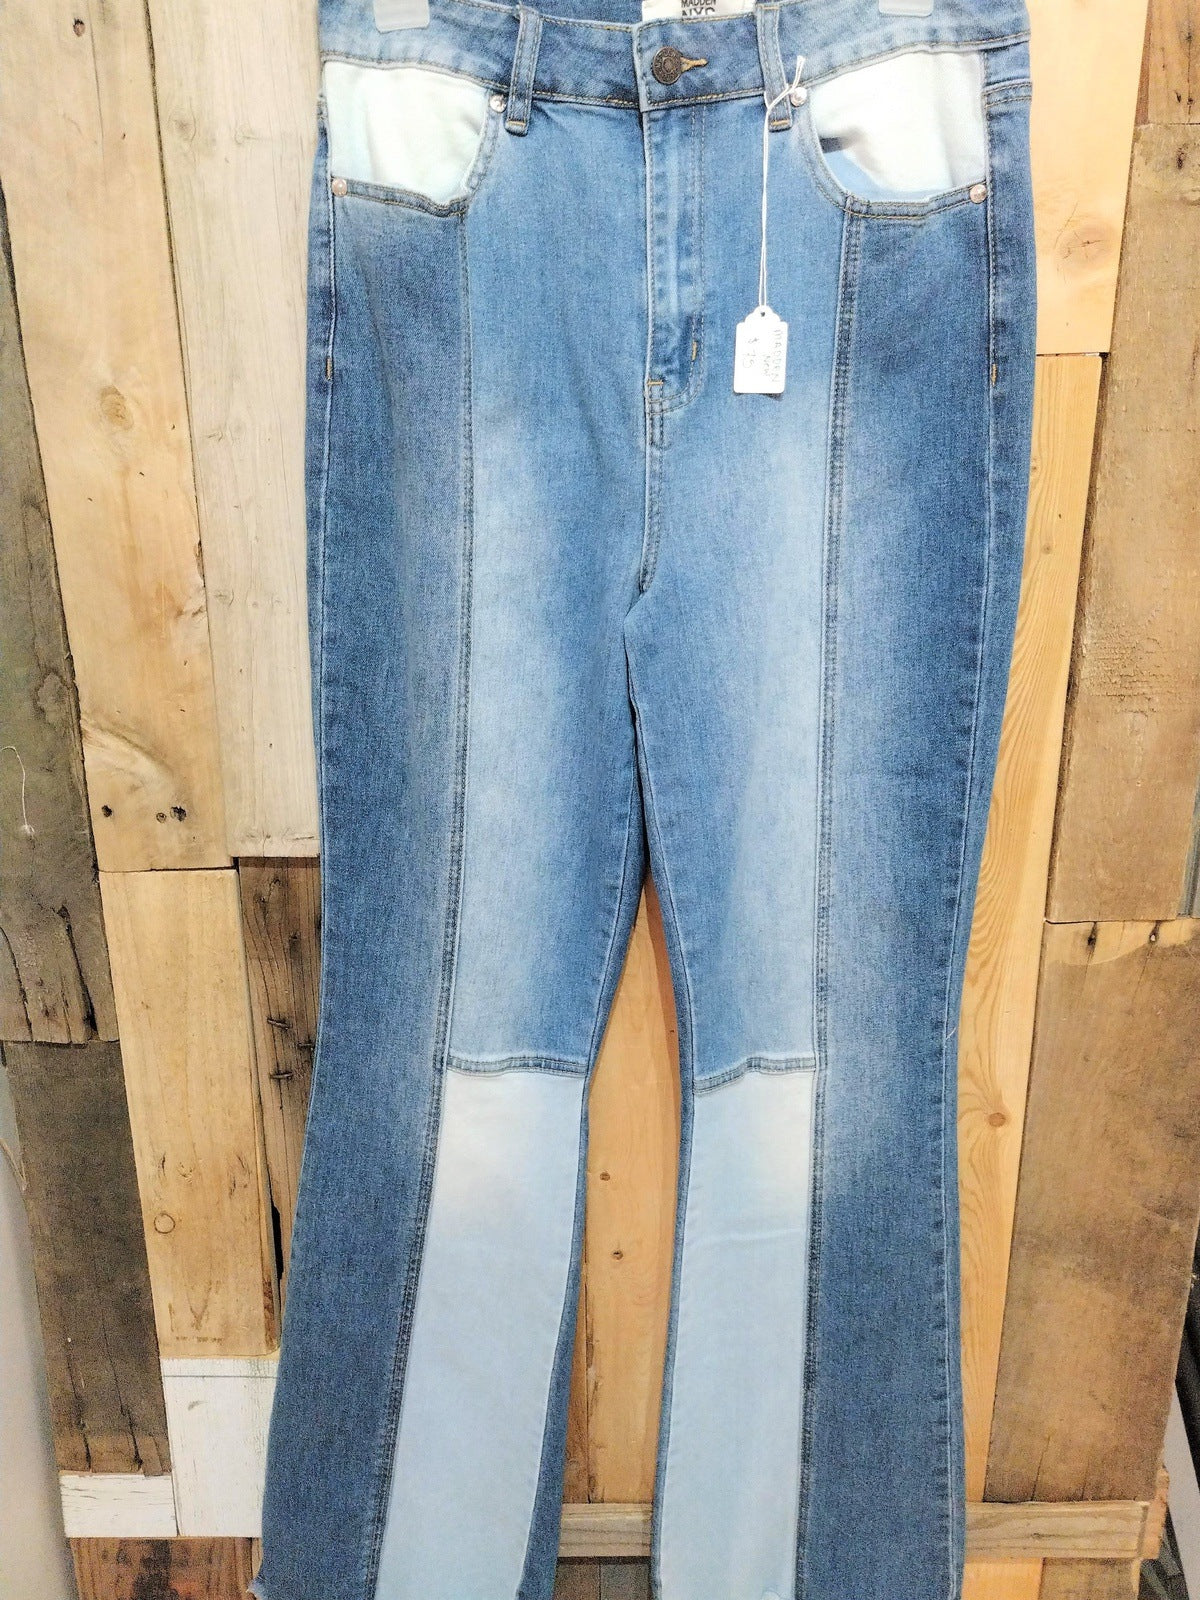 Madden NYC Women's Ultra High Rise Flare Jeans Size 9 New with Tags